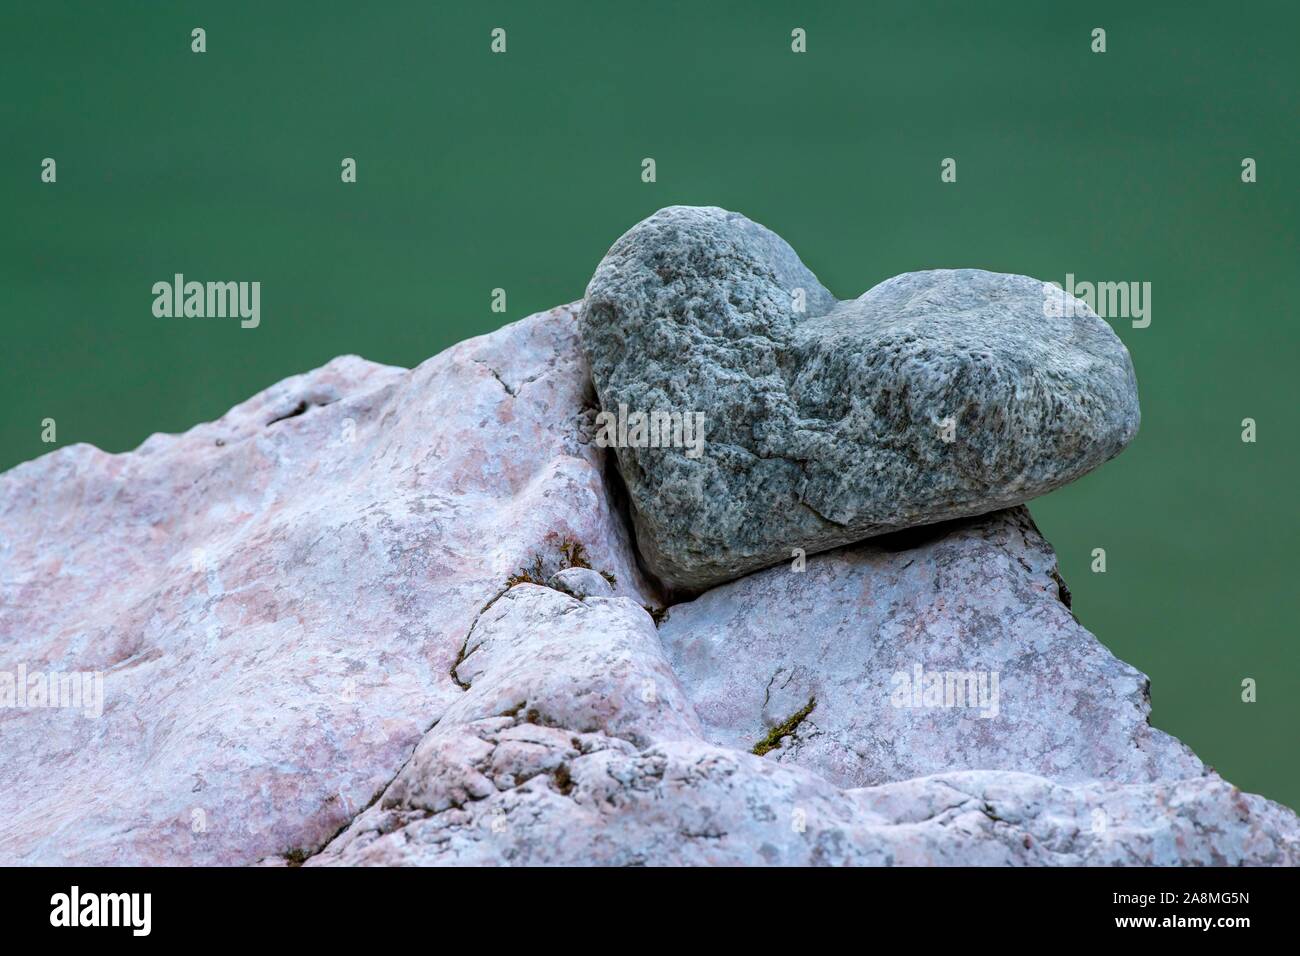 Stone in the shape of a heart lies in the notch of another stone, Tiefenbachklamm, Kramsach, Tyrol, Austria Stock Photo